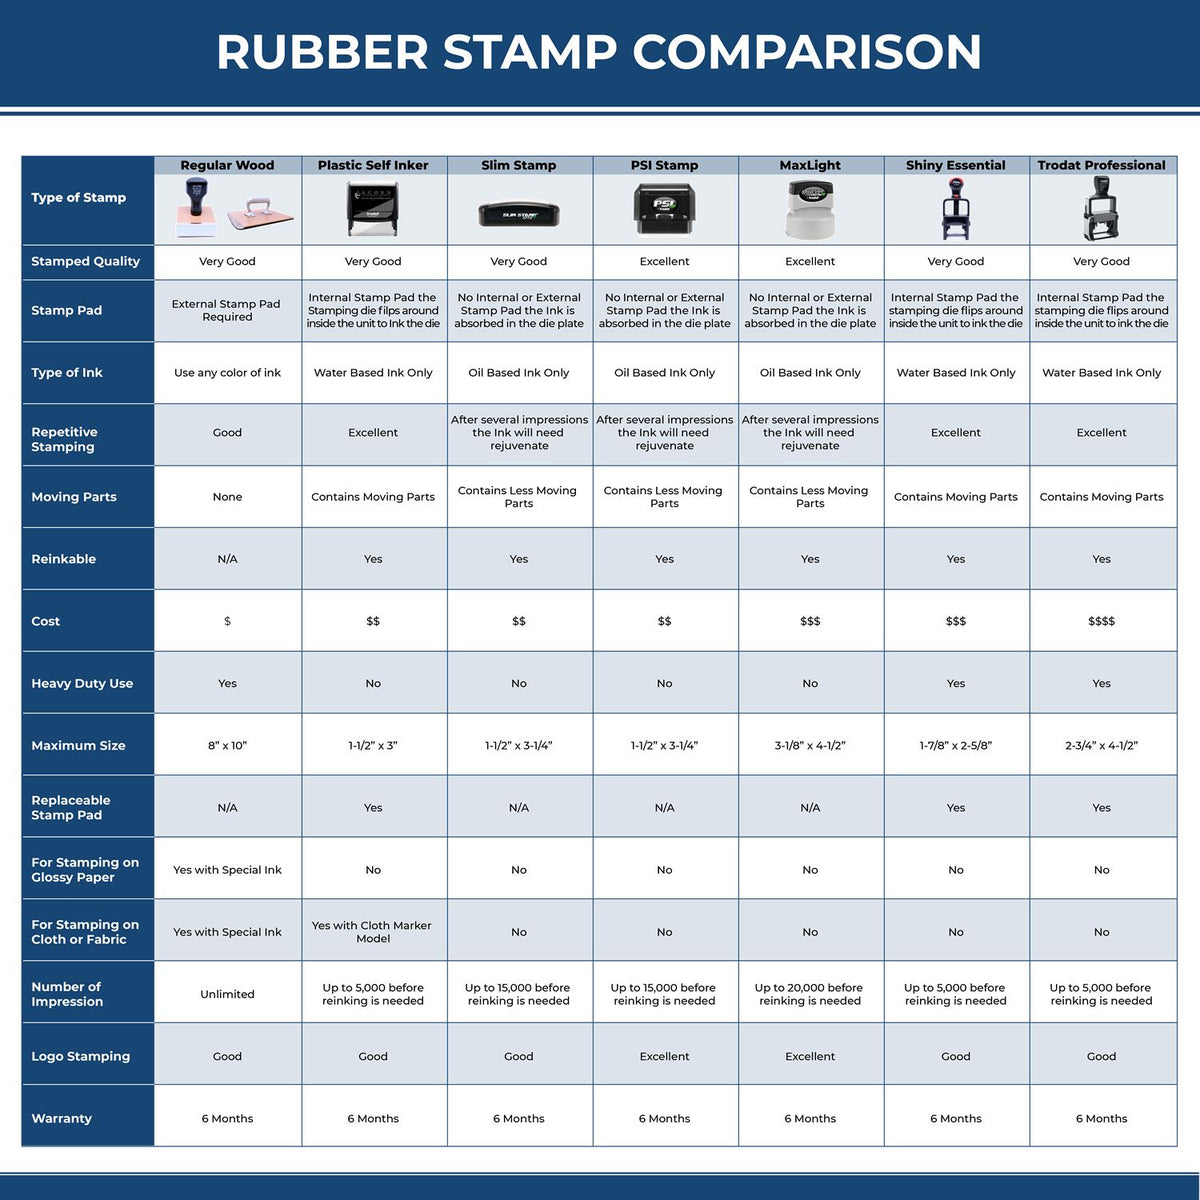 Xstamper Public Weighmaster Pre-Inked Rubber Stamp of Seal 3038WE Rubber Stamp Comparison